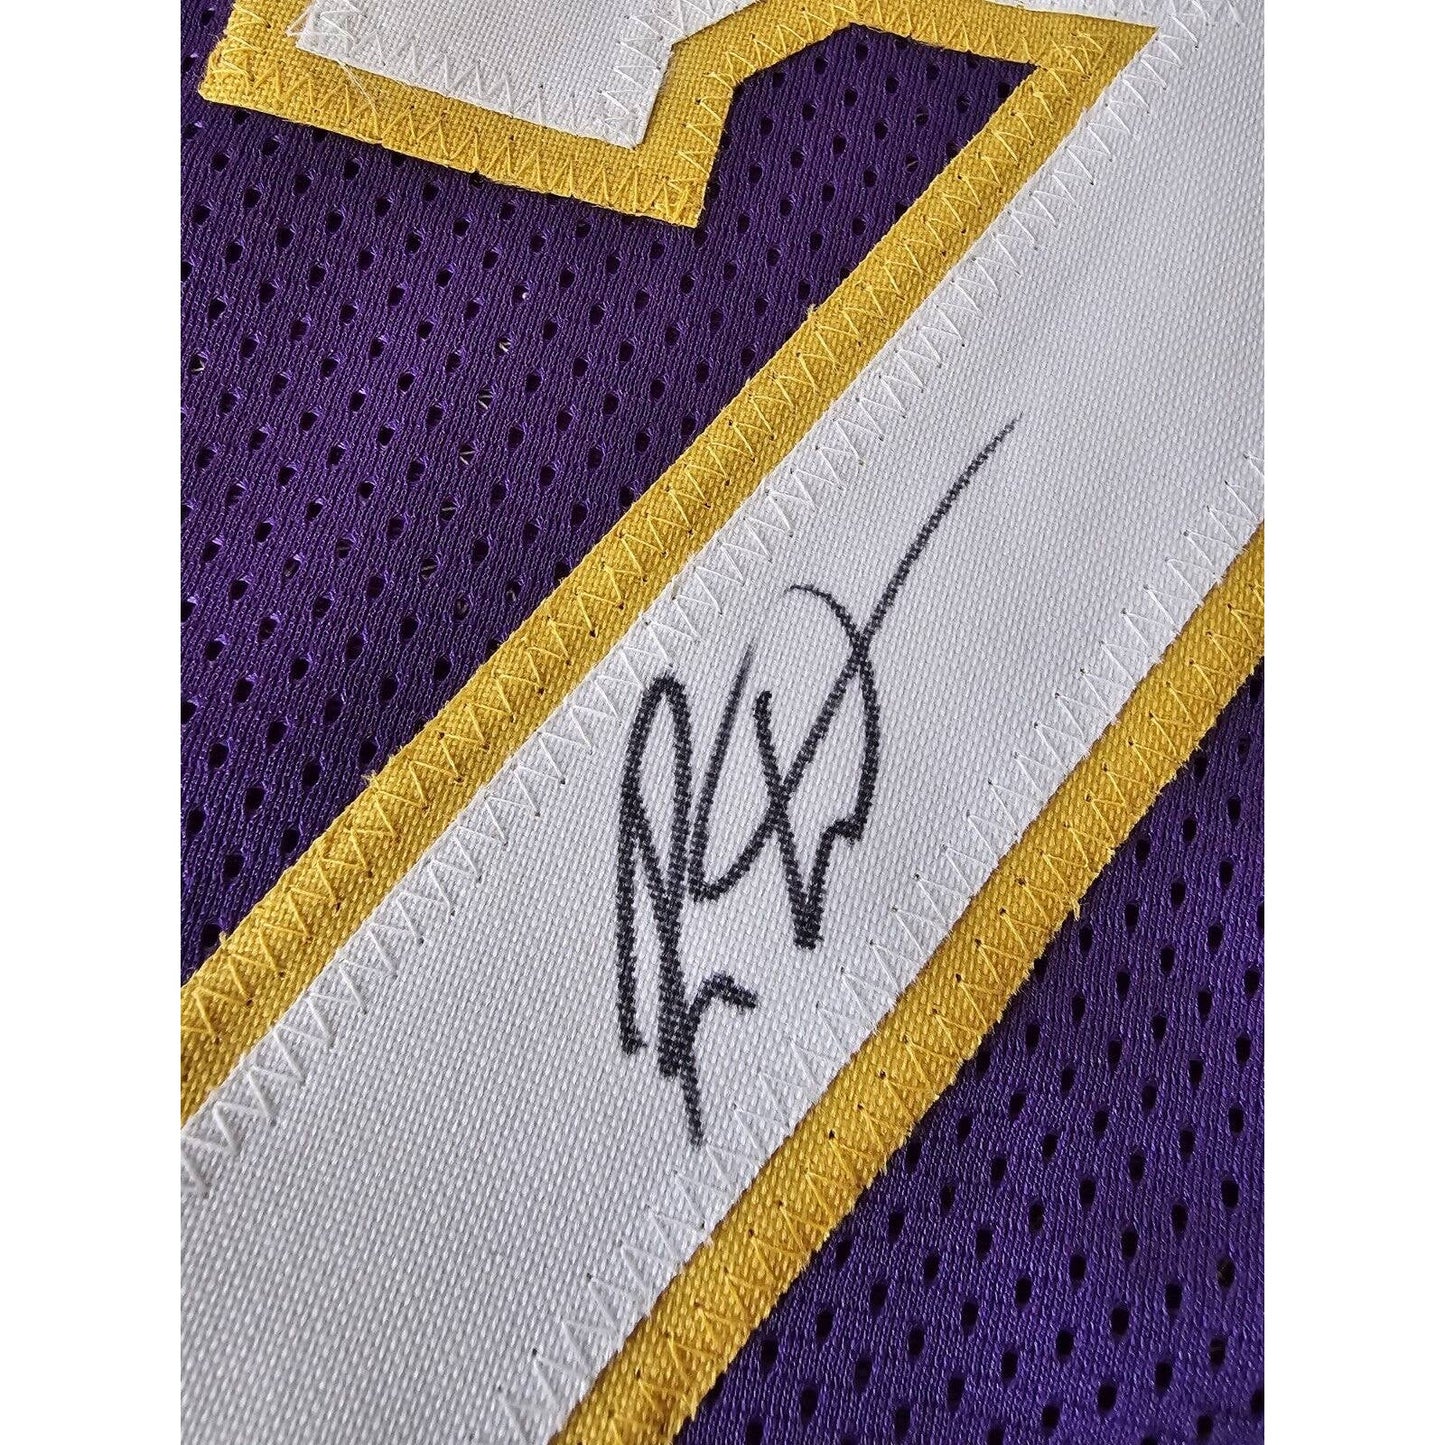 Ron Artest Autographed/Signed Jersey COA Los Angeles Lakers Metta World Peace